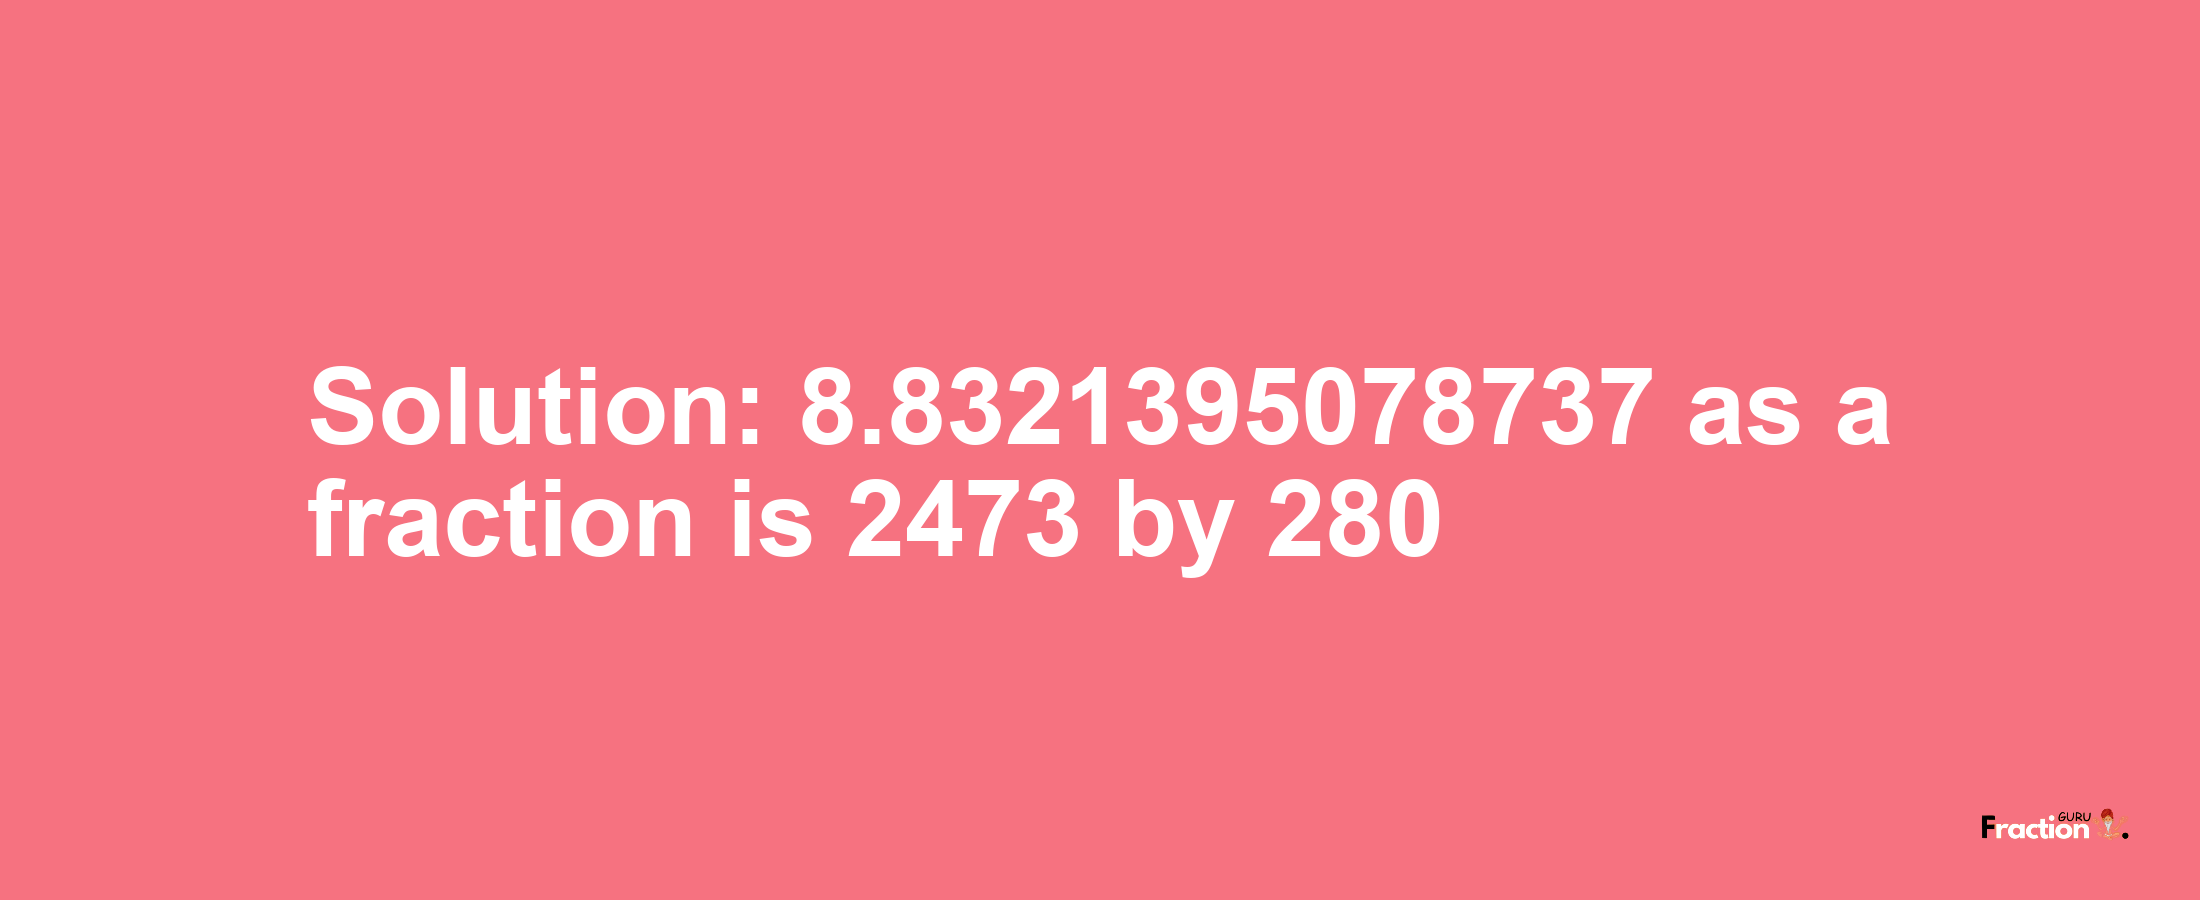 Solution:8.8321395078737 as a fraction is 2473/280